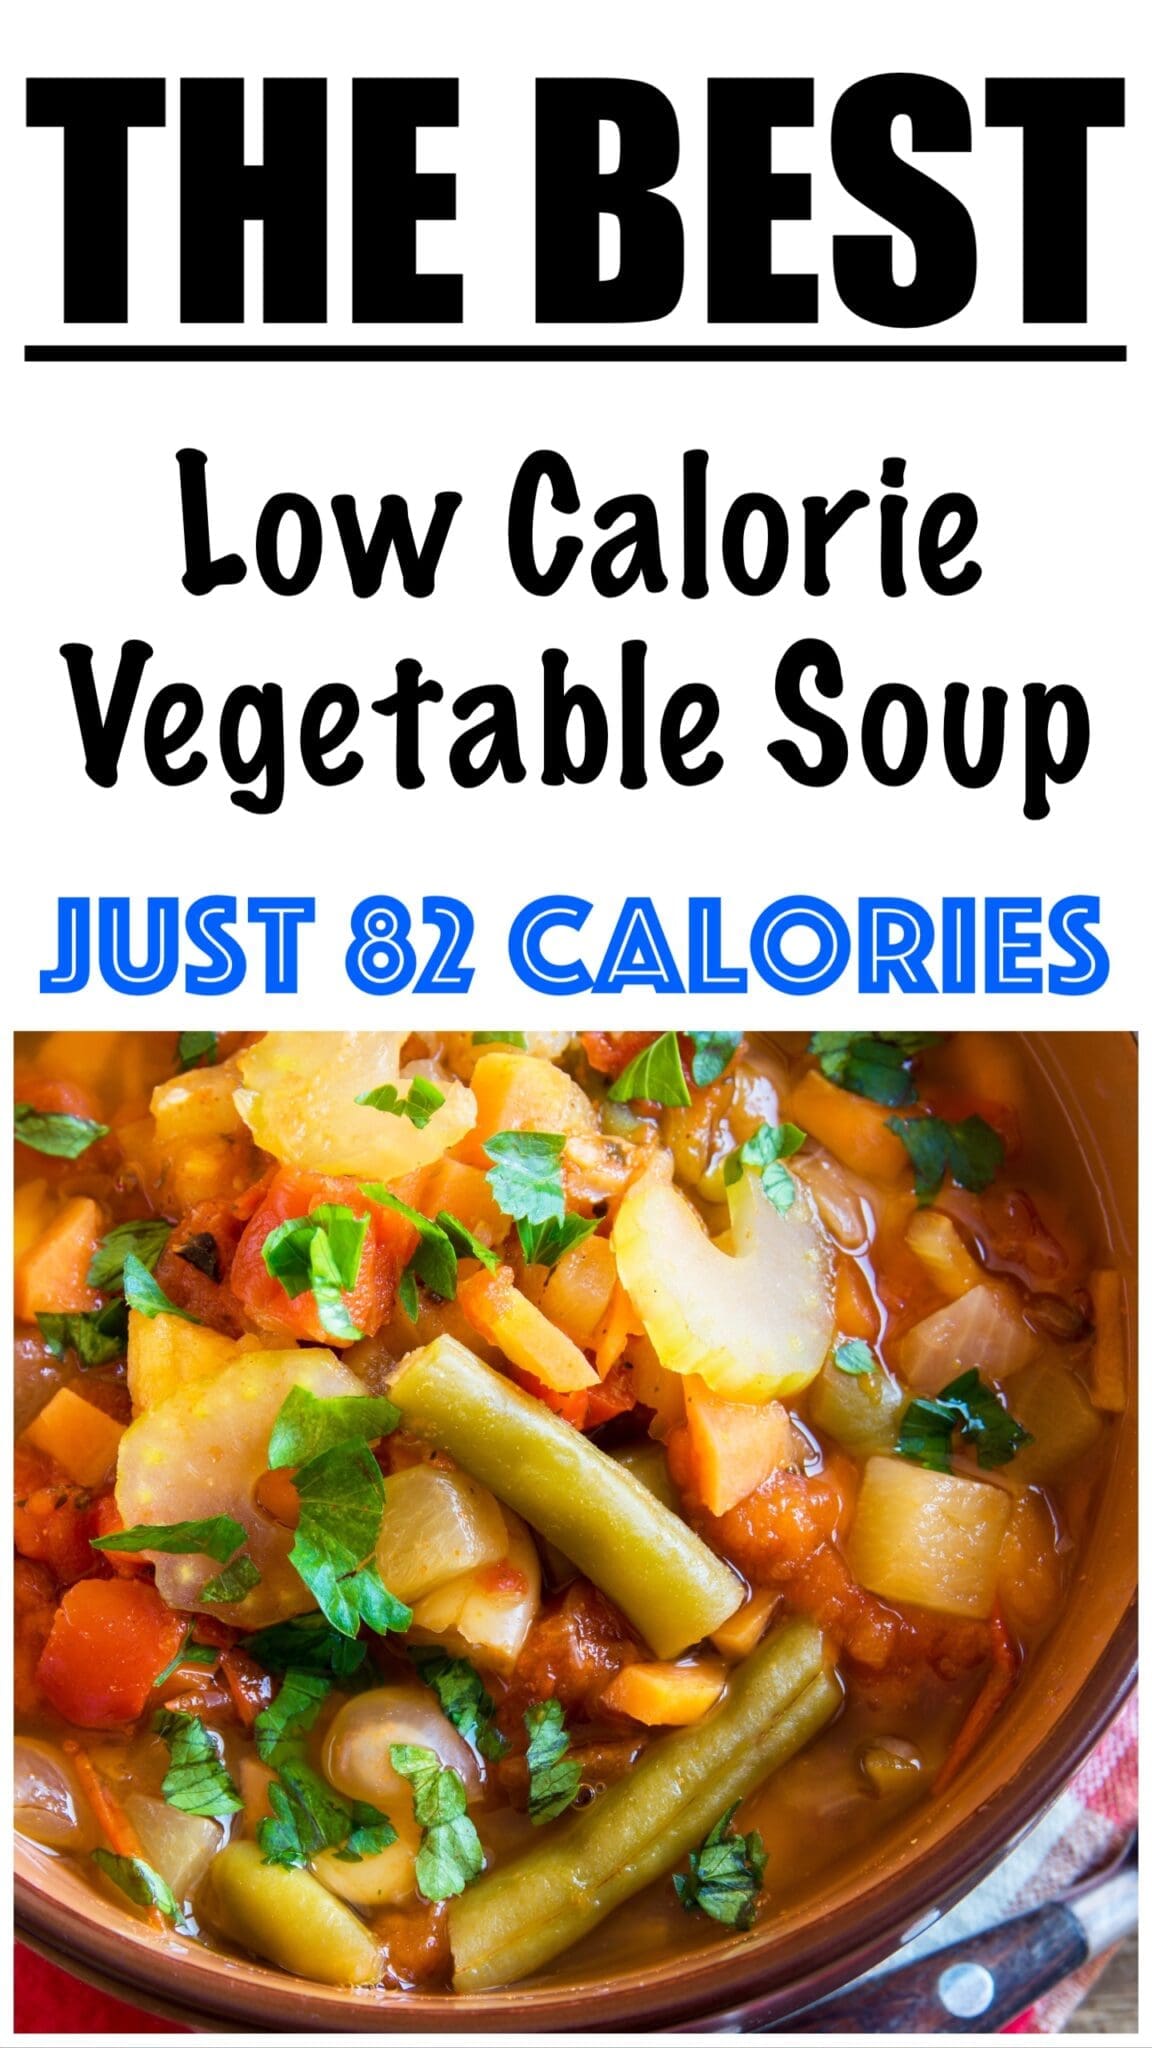 Low Calorie Vegetable Soup - Lose Weight By Eating